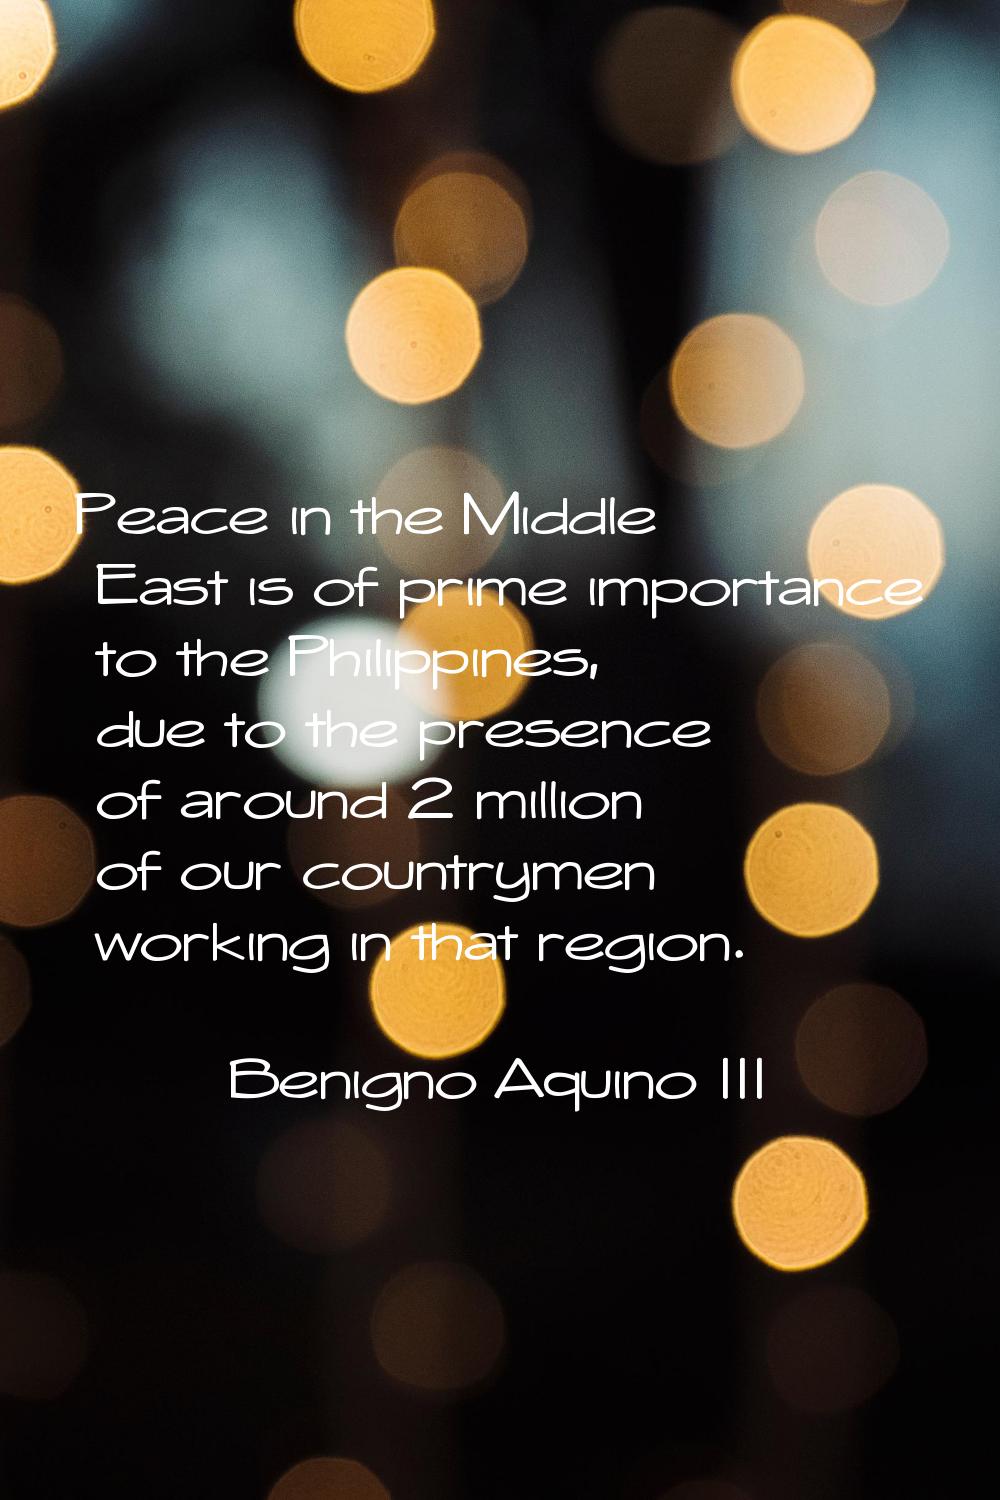 Peace in the Middle East is of prime importance to the Philippines, due to the presence of around 2